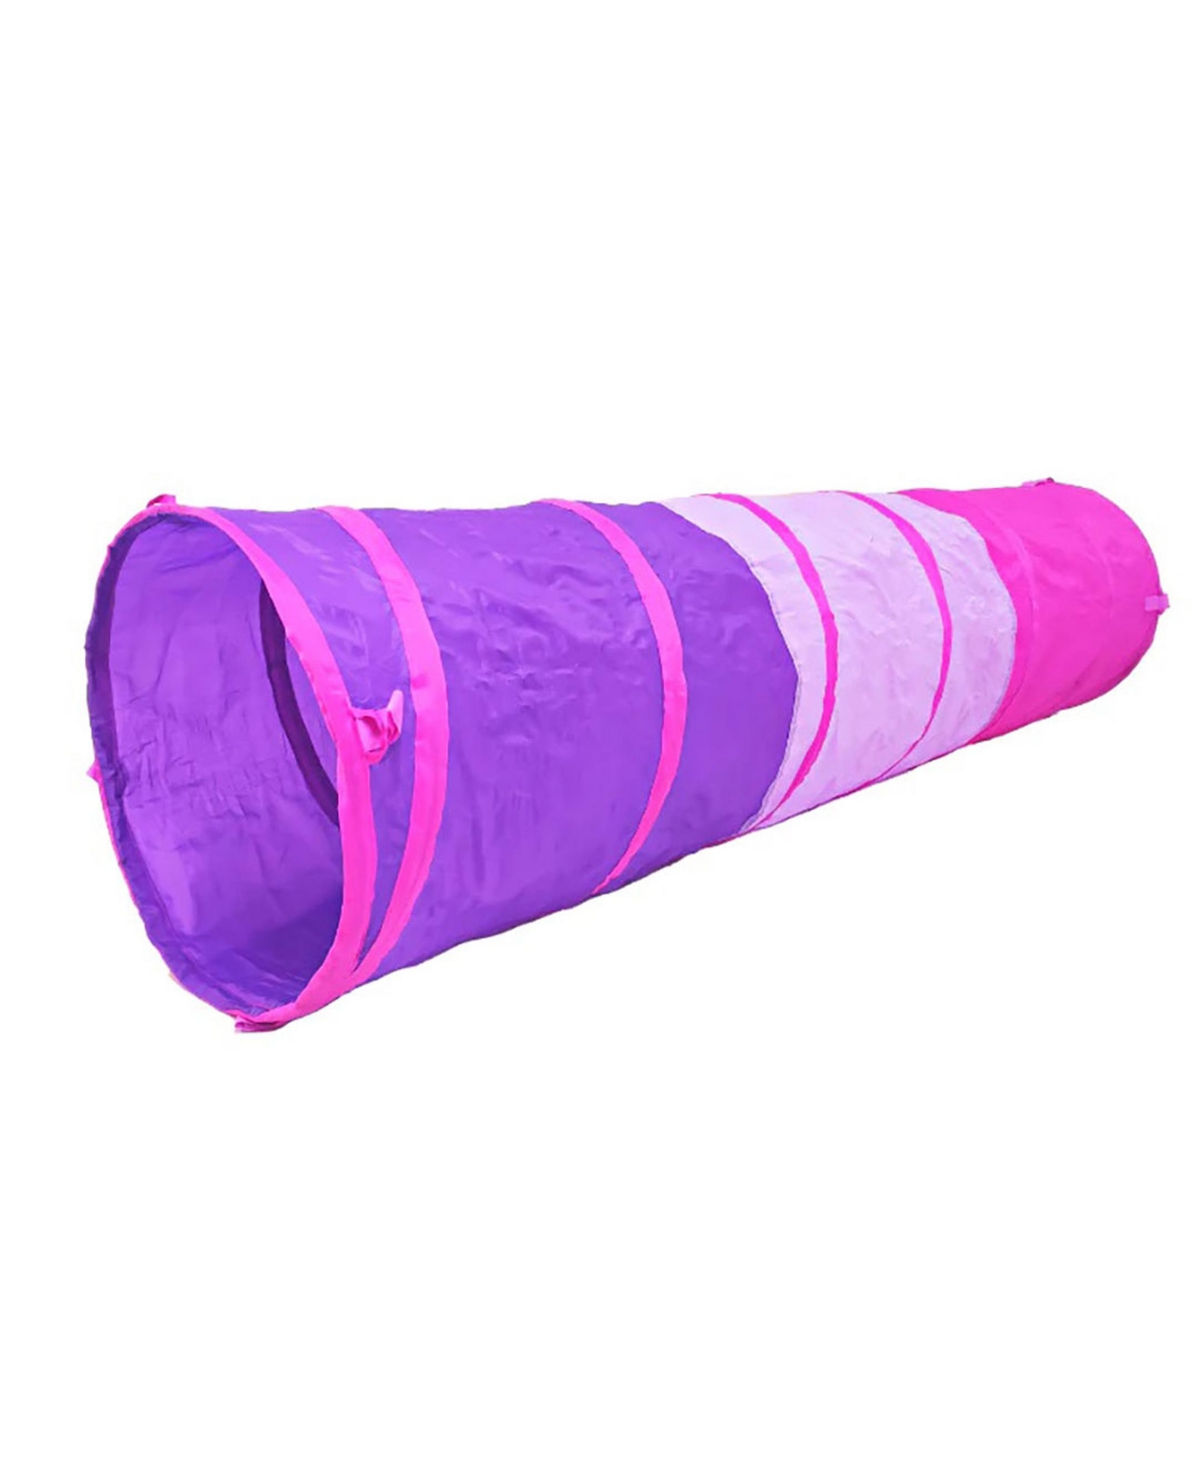 M&m Sales Enterprises Blossom House Pop-out Play Tunnel In Purple,pink